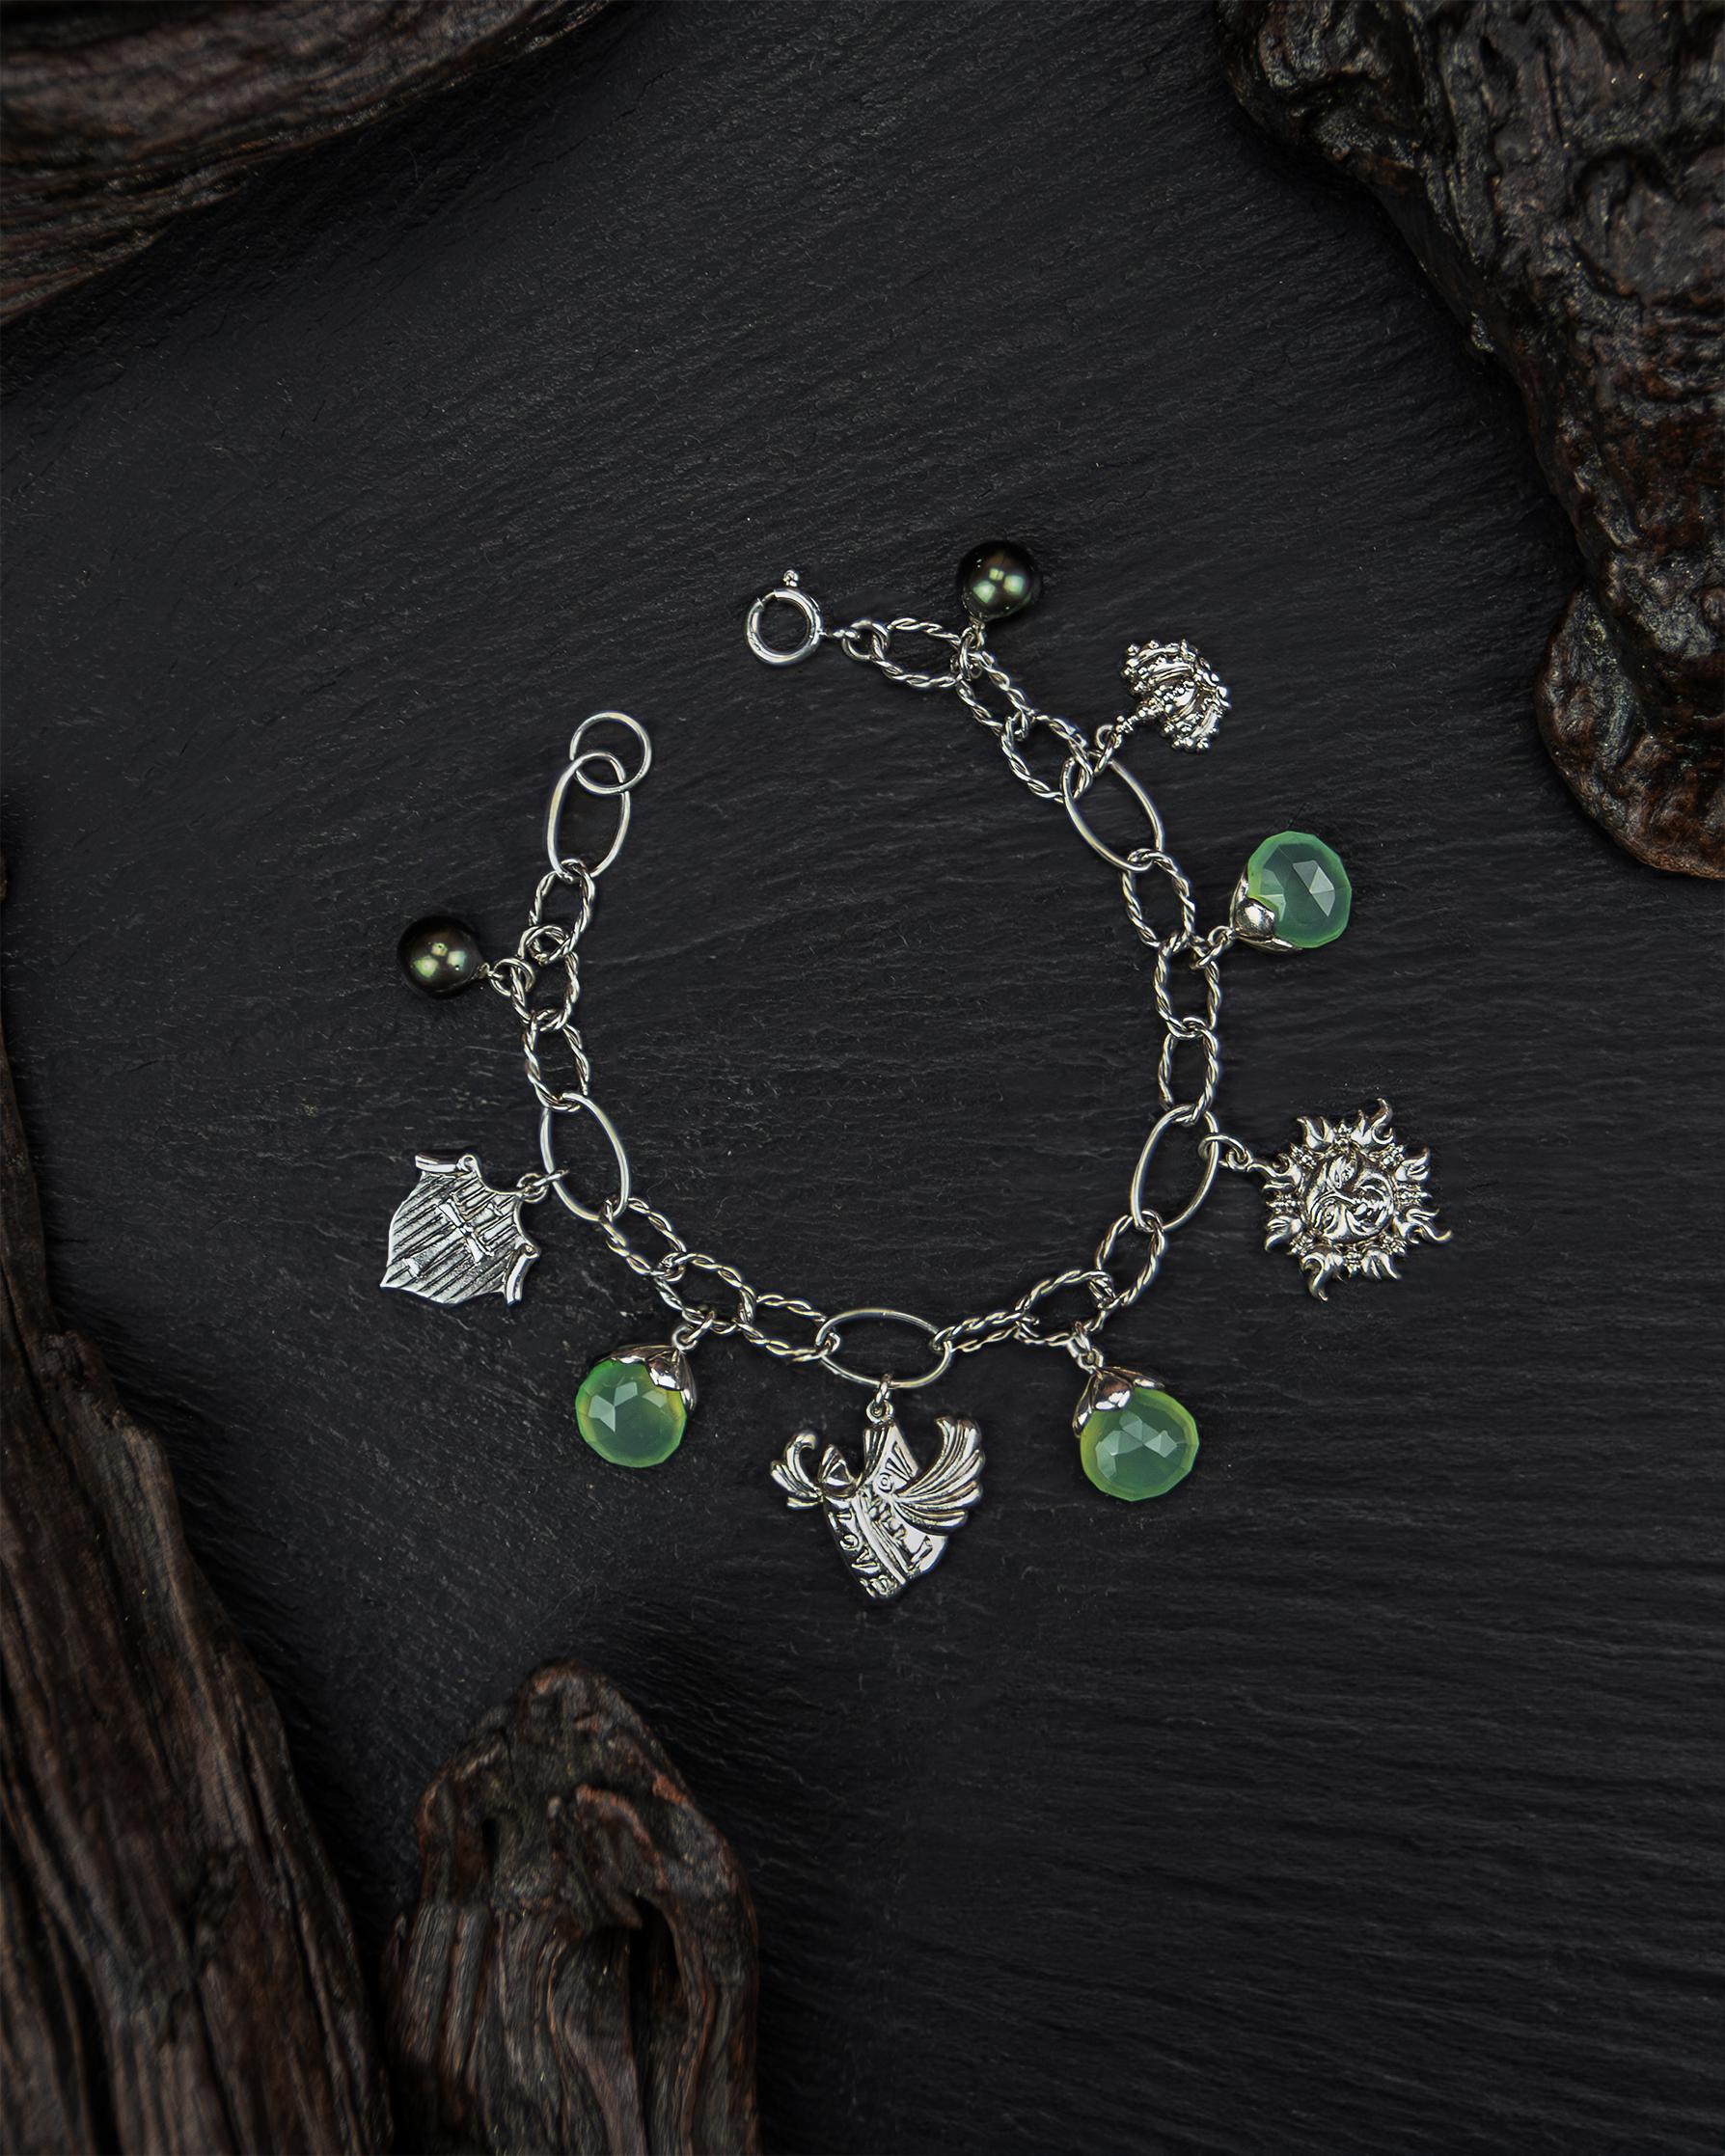 Live up your inner magical fantasy with the Regal Fantasy Charm Bracelet, crafted from Sterling Silver, Green Chalcedony, and peacock-colour Tahitian Pearls. The array of charms - a regal crest, love book, smiling sun, and crown - will bring a touch